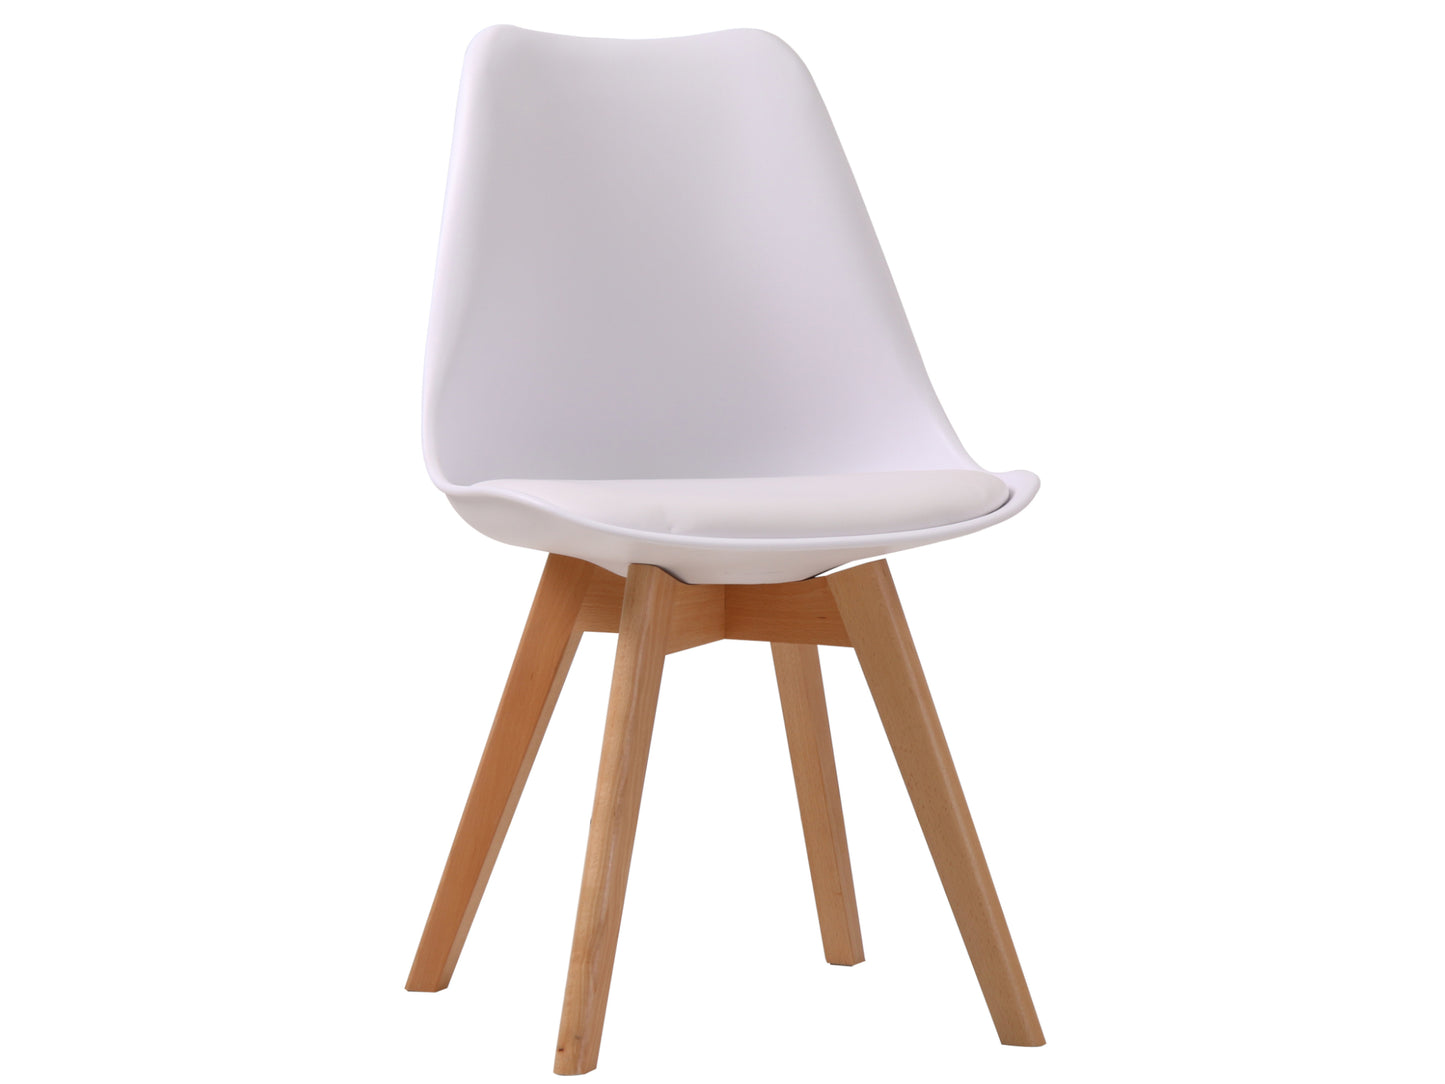 Louvre Dining Chair in White (2 Pack)